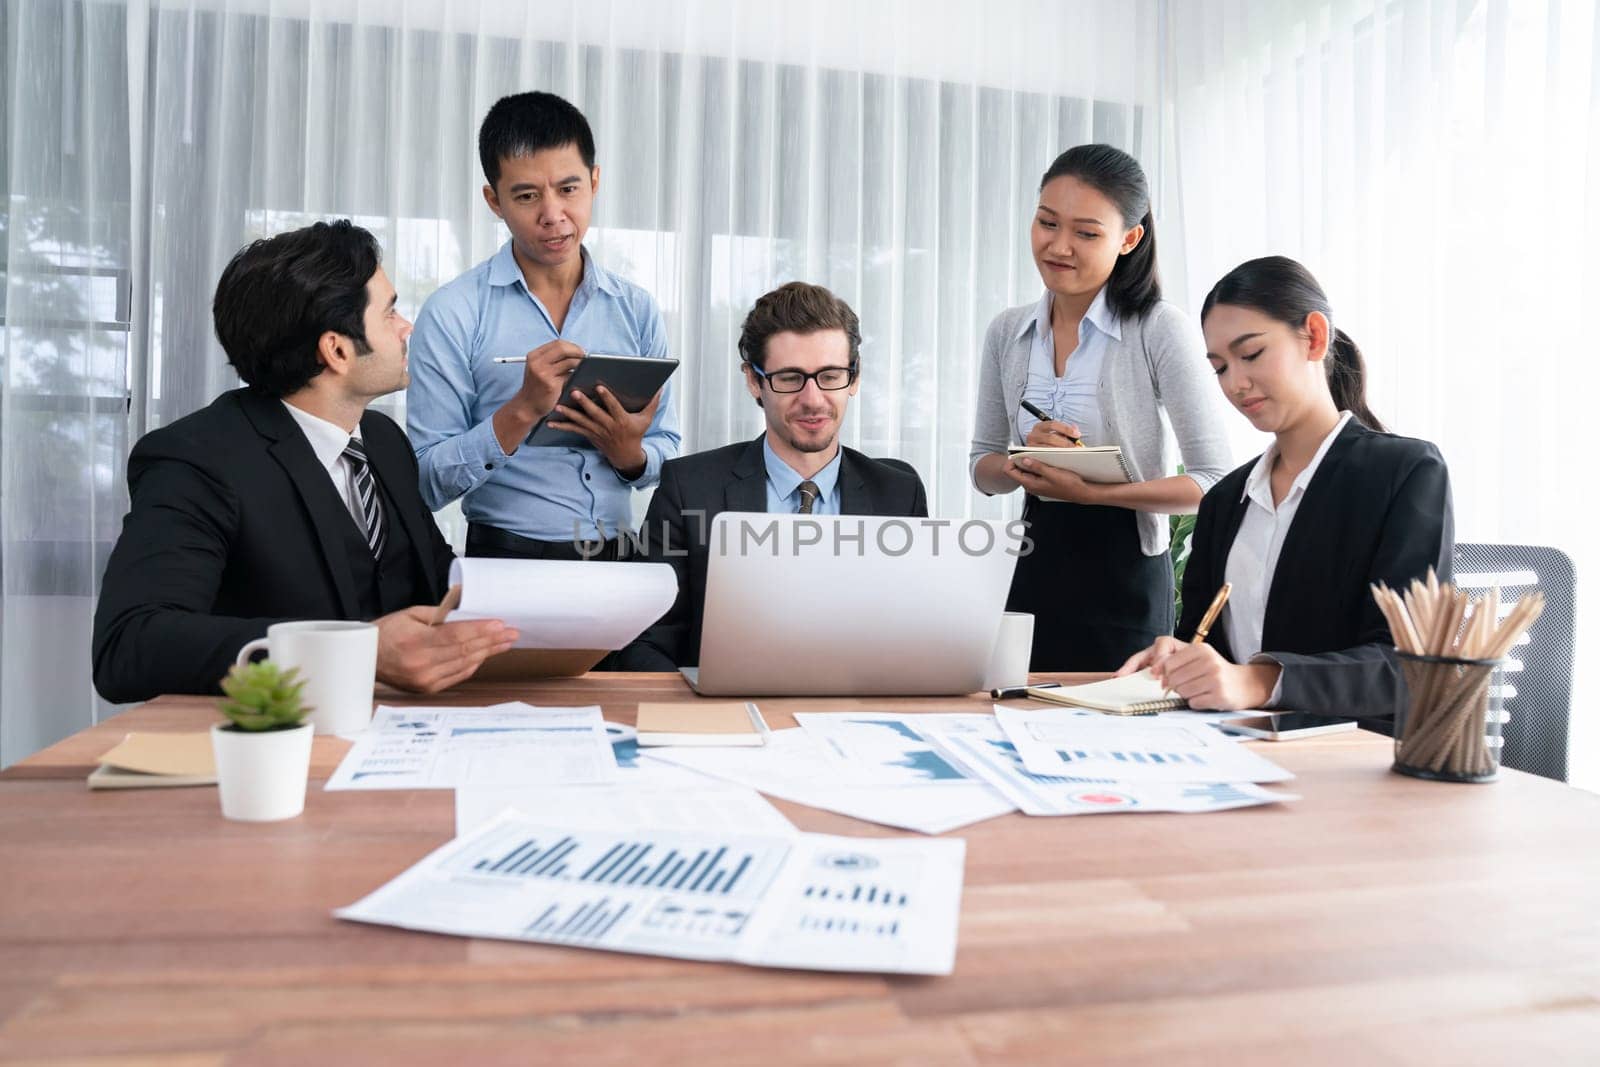 Diverse group of business analyst team analyzing financial data report paper on office table. Chart and graph dashboard by business intelligence analysis for strategic marketing planning Habiliment